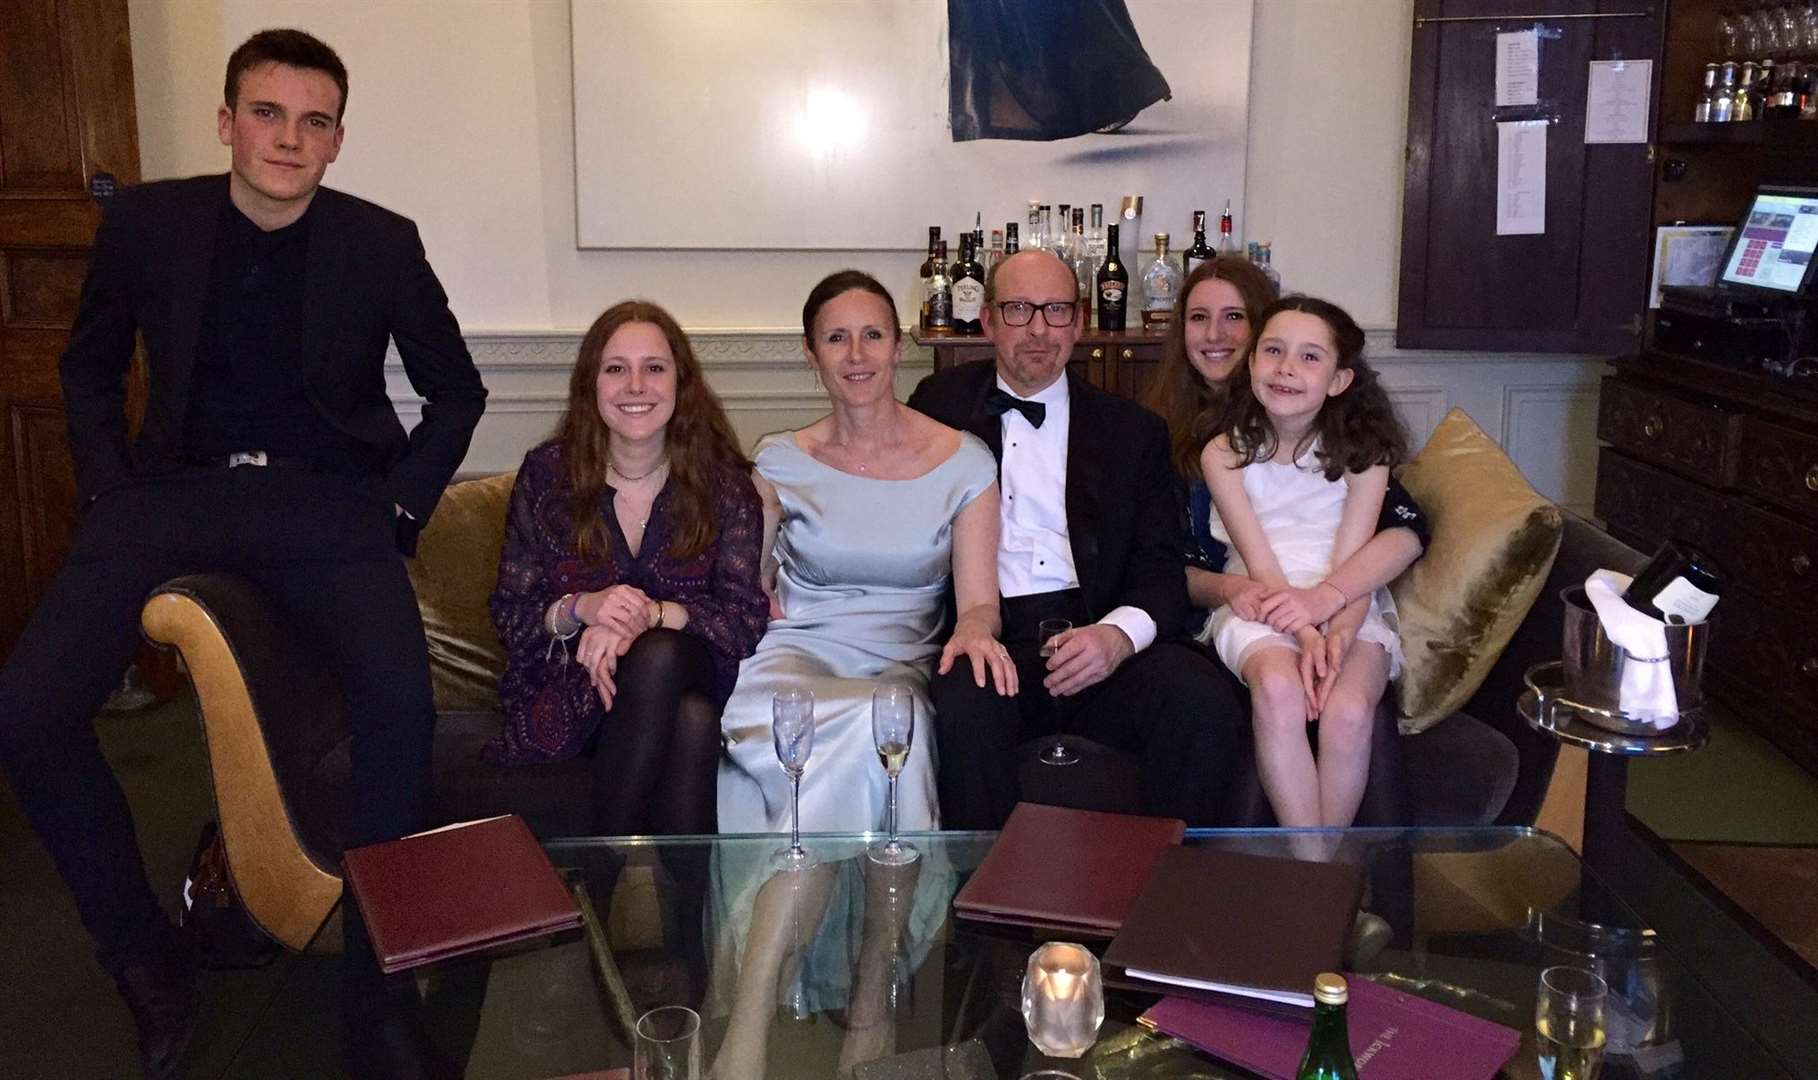 Florence (centre) pictured with her family, one year before her breast cancer diagnosis